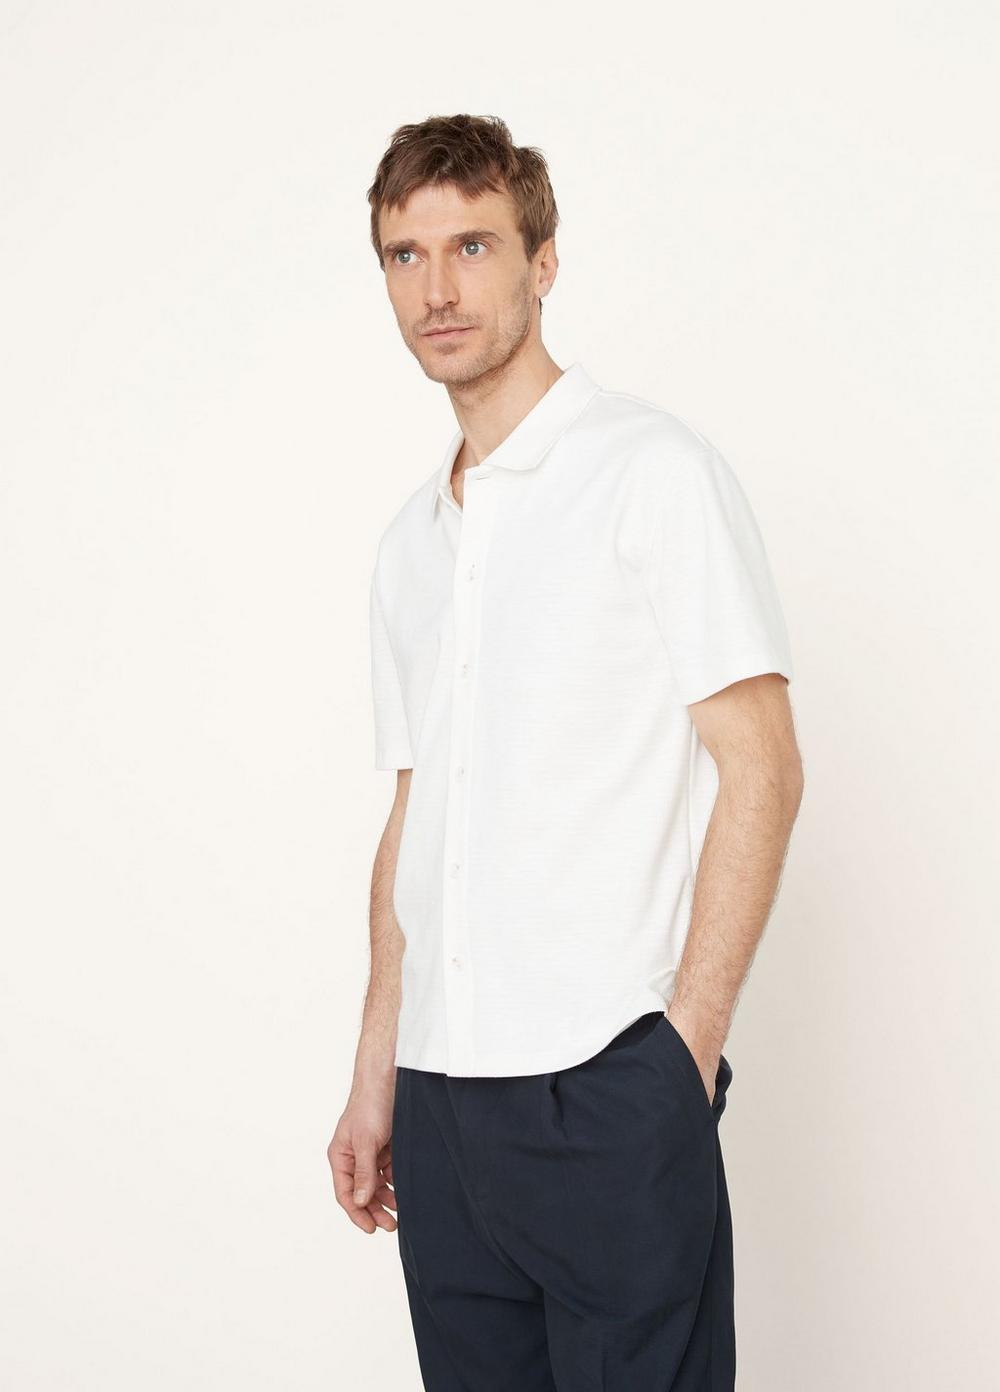 Variegated Jacquard Short Sleeve Button Down